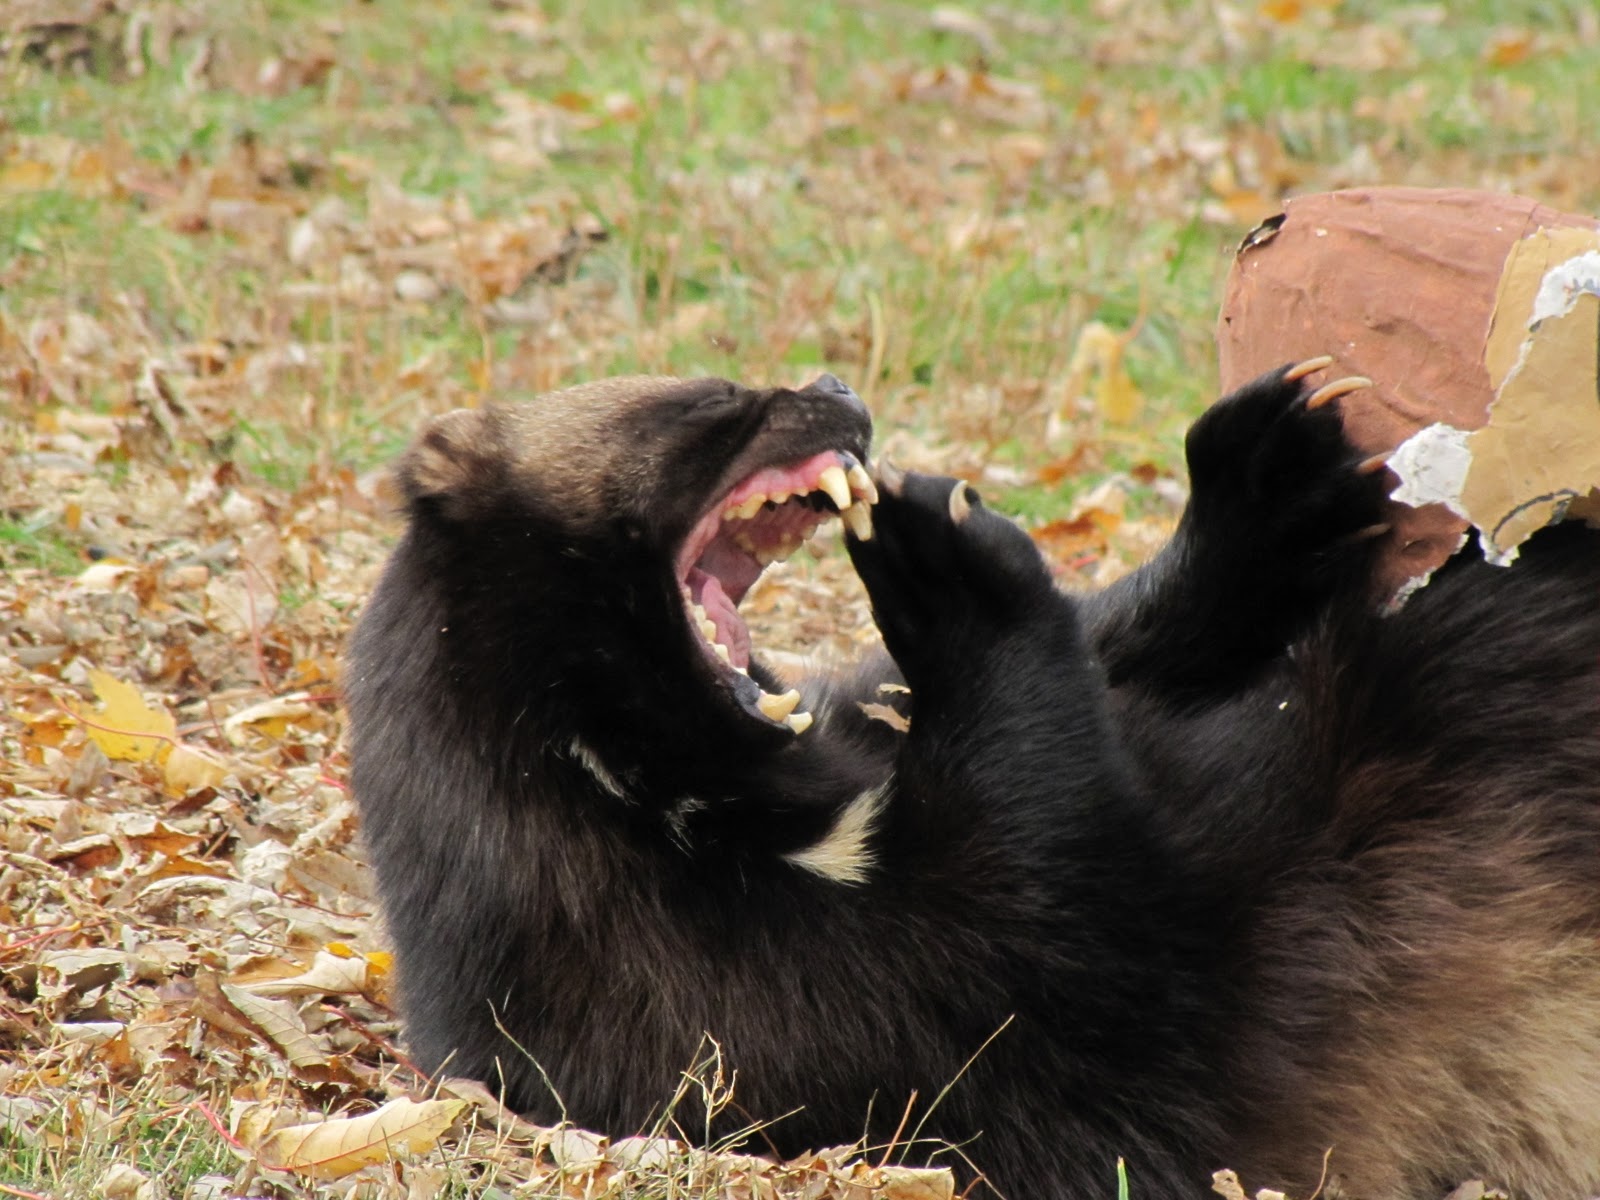 The Oakland Press Blogs: Earth's Almanac: BREAKING NEWS: When Wolverines Attack!